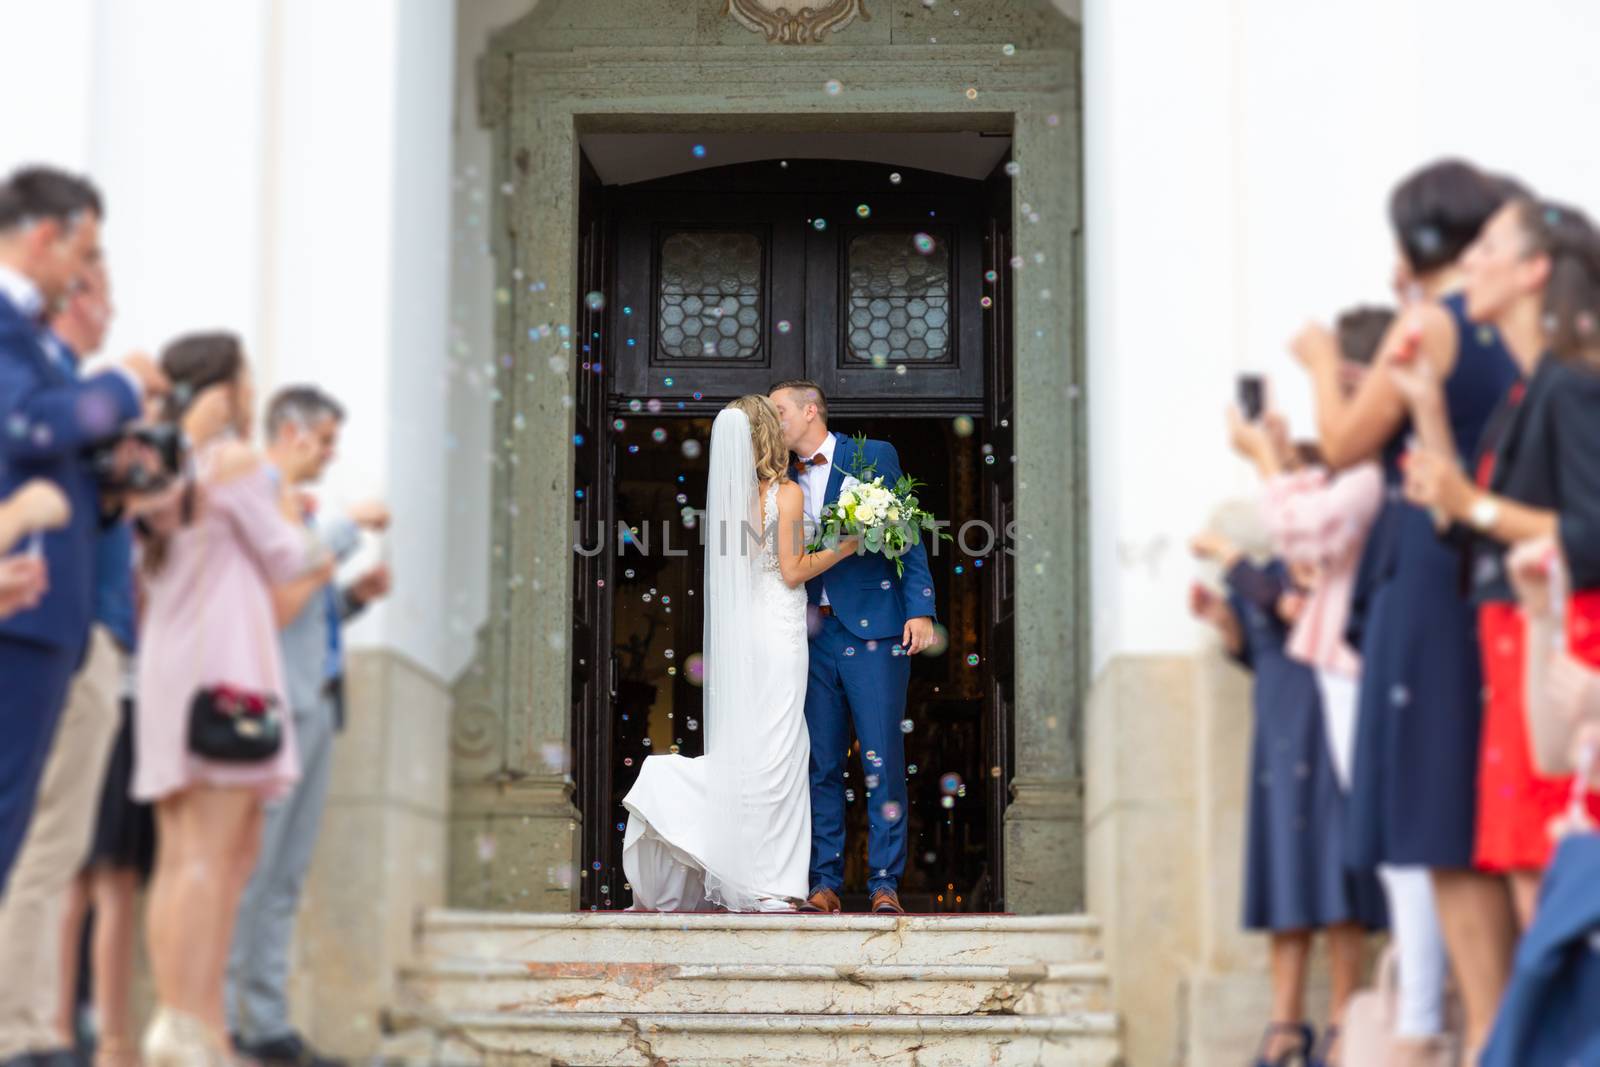 Newlyweds kissing while exiting the church after wedding ceremony, family and friends celebrating their love with the shower of soap bubbles, custom undermining traditional rice bath.